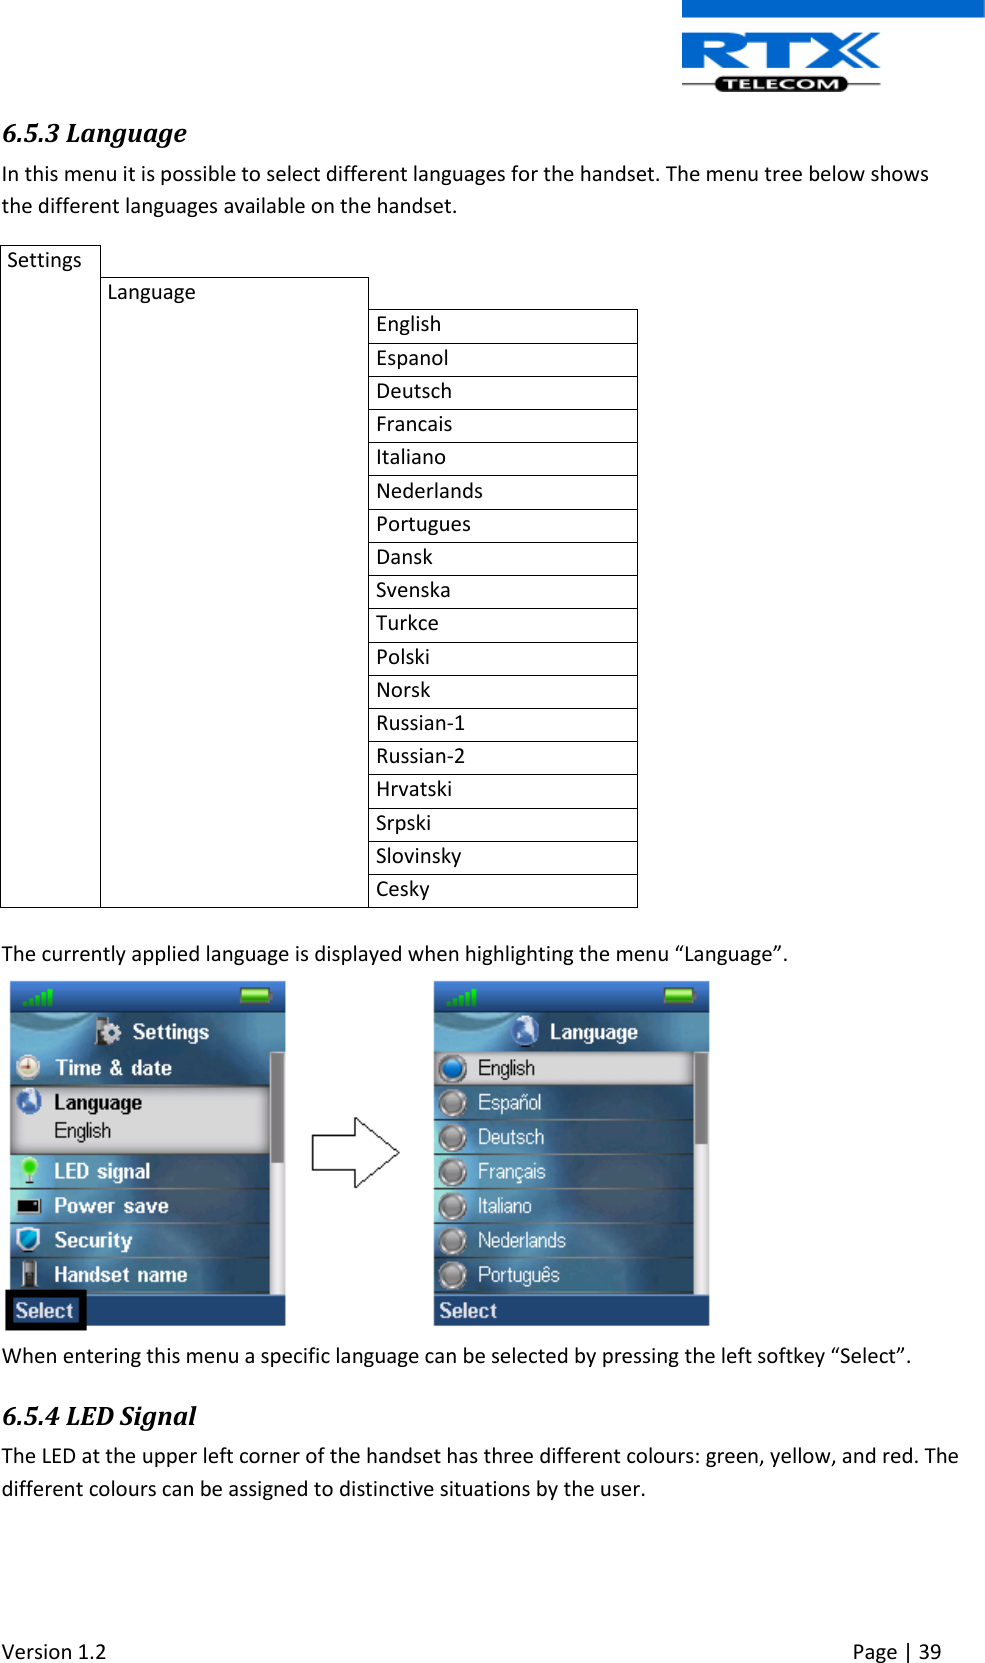  Version 1.2     Page | 39   6.5.3 Language In this menu it is possible to select different languages for the handset. The menu tree below shows the different languages available on the handset. Settings   Language  English Espanol Deutsch Francais Italiano Nederlands Portugues Dansk Svenska Turkce Polski Norsk Russian-1 Russian-2 Hrvatski Srpski Slovinsky Cesky  The currently applied language is displayed when highlighting the menu “Language”.   When entering this menu a specific language can be selected by pressing the left softkey “Select”.  6.5.4 LED Signal The LED at the upper left corner of the handset has three different colours: green, yellow, and red. The different colours can be assigned to distinctive situations by the user.   